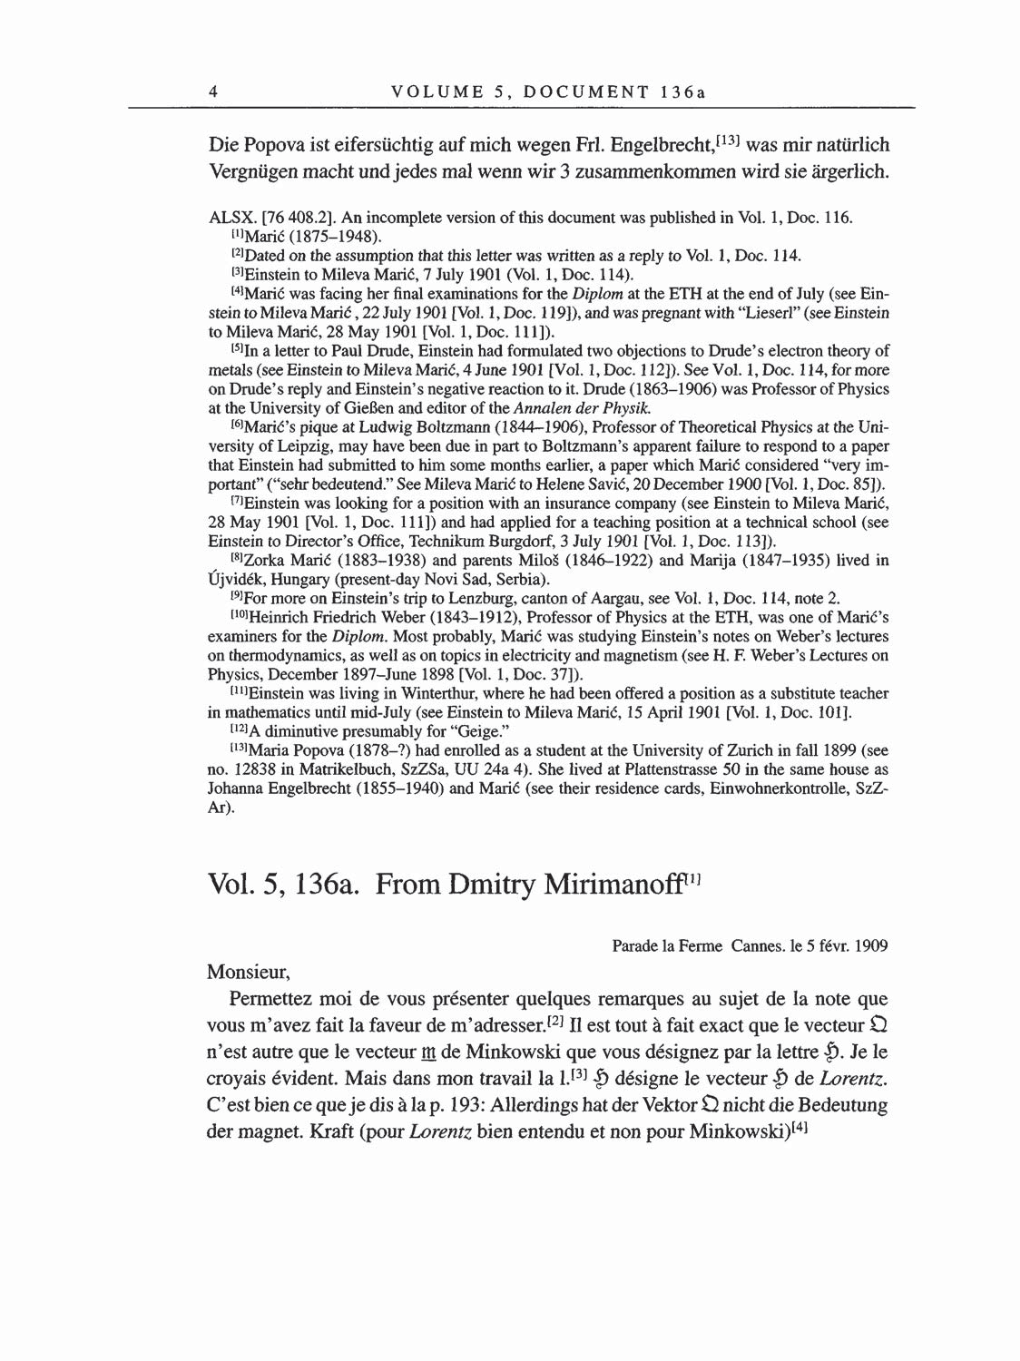 Volume 8, Part A: The Berlin Years: Correspondence 1914-1917 page 4